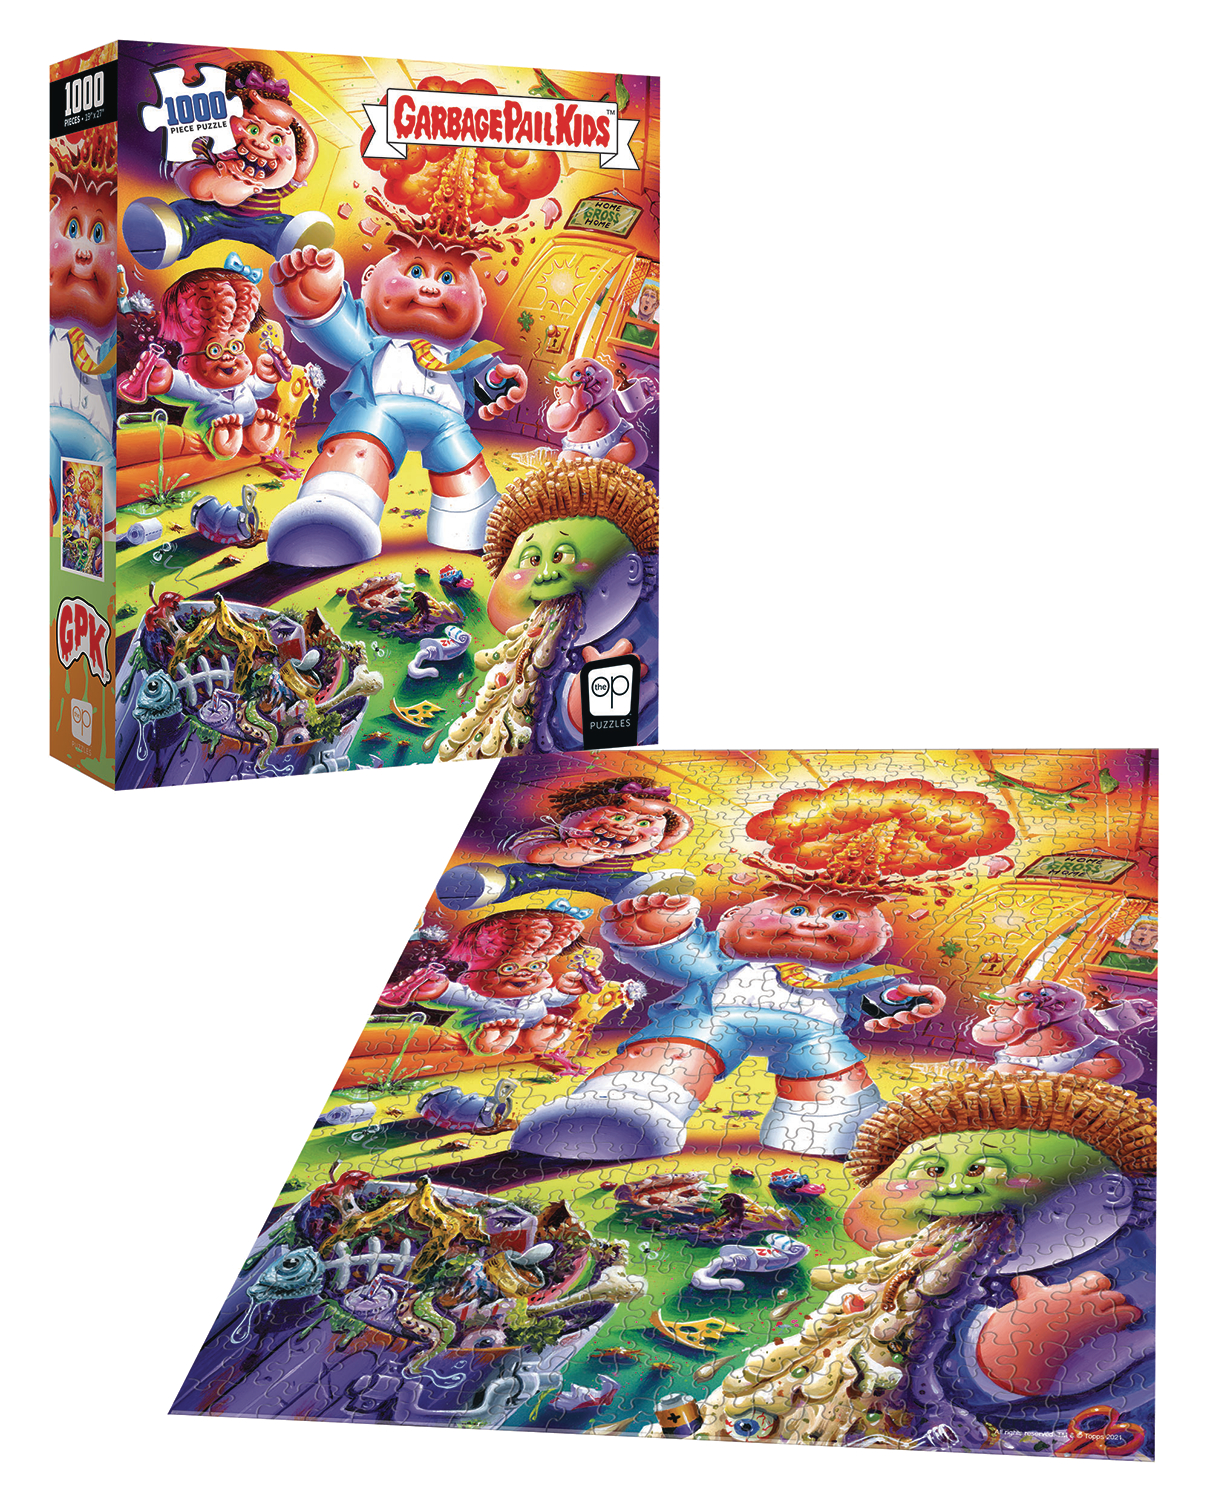 Garbage Pail Kids Home Gross Game 1000 Pc Puzzle